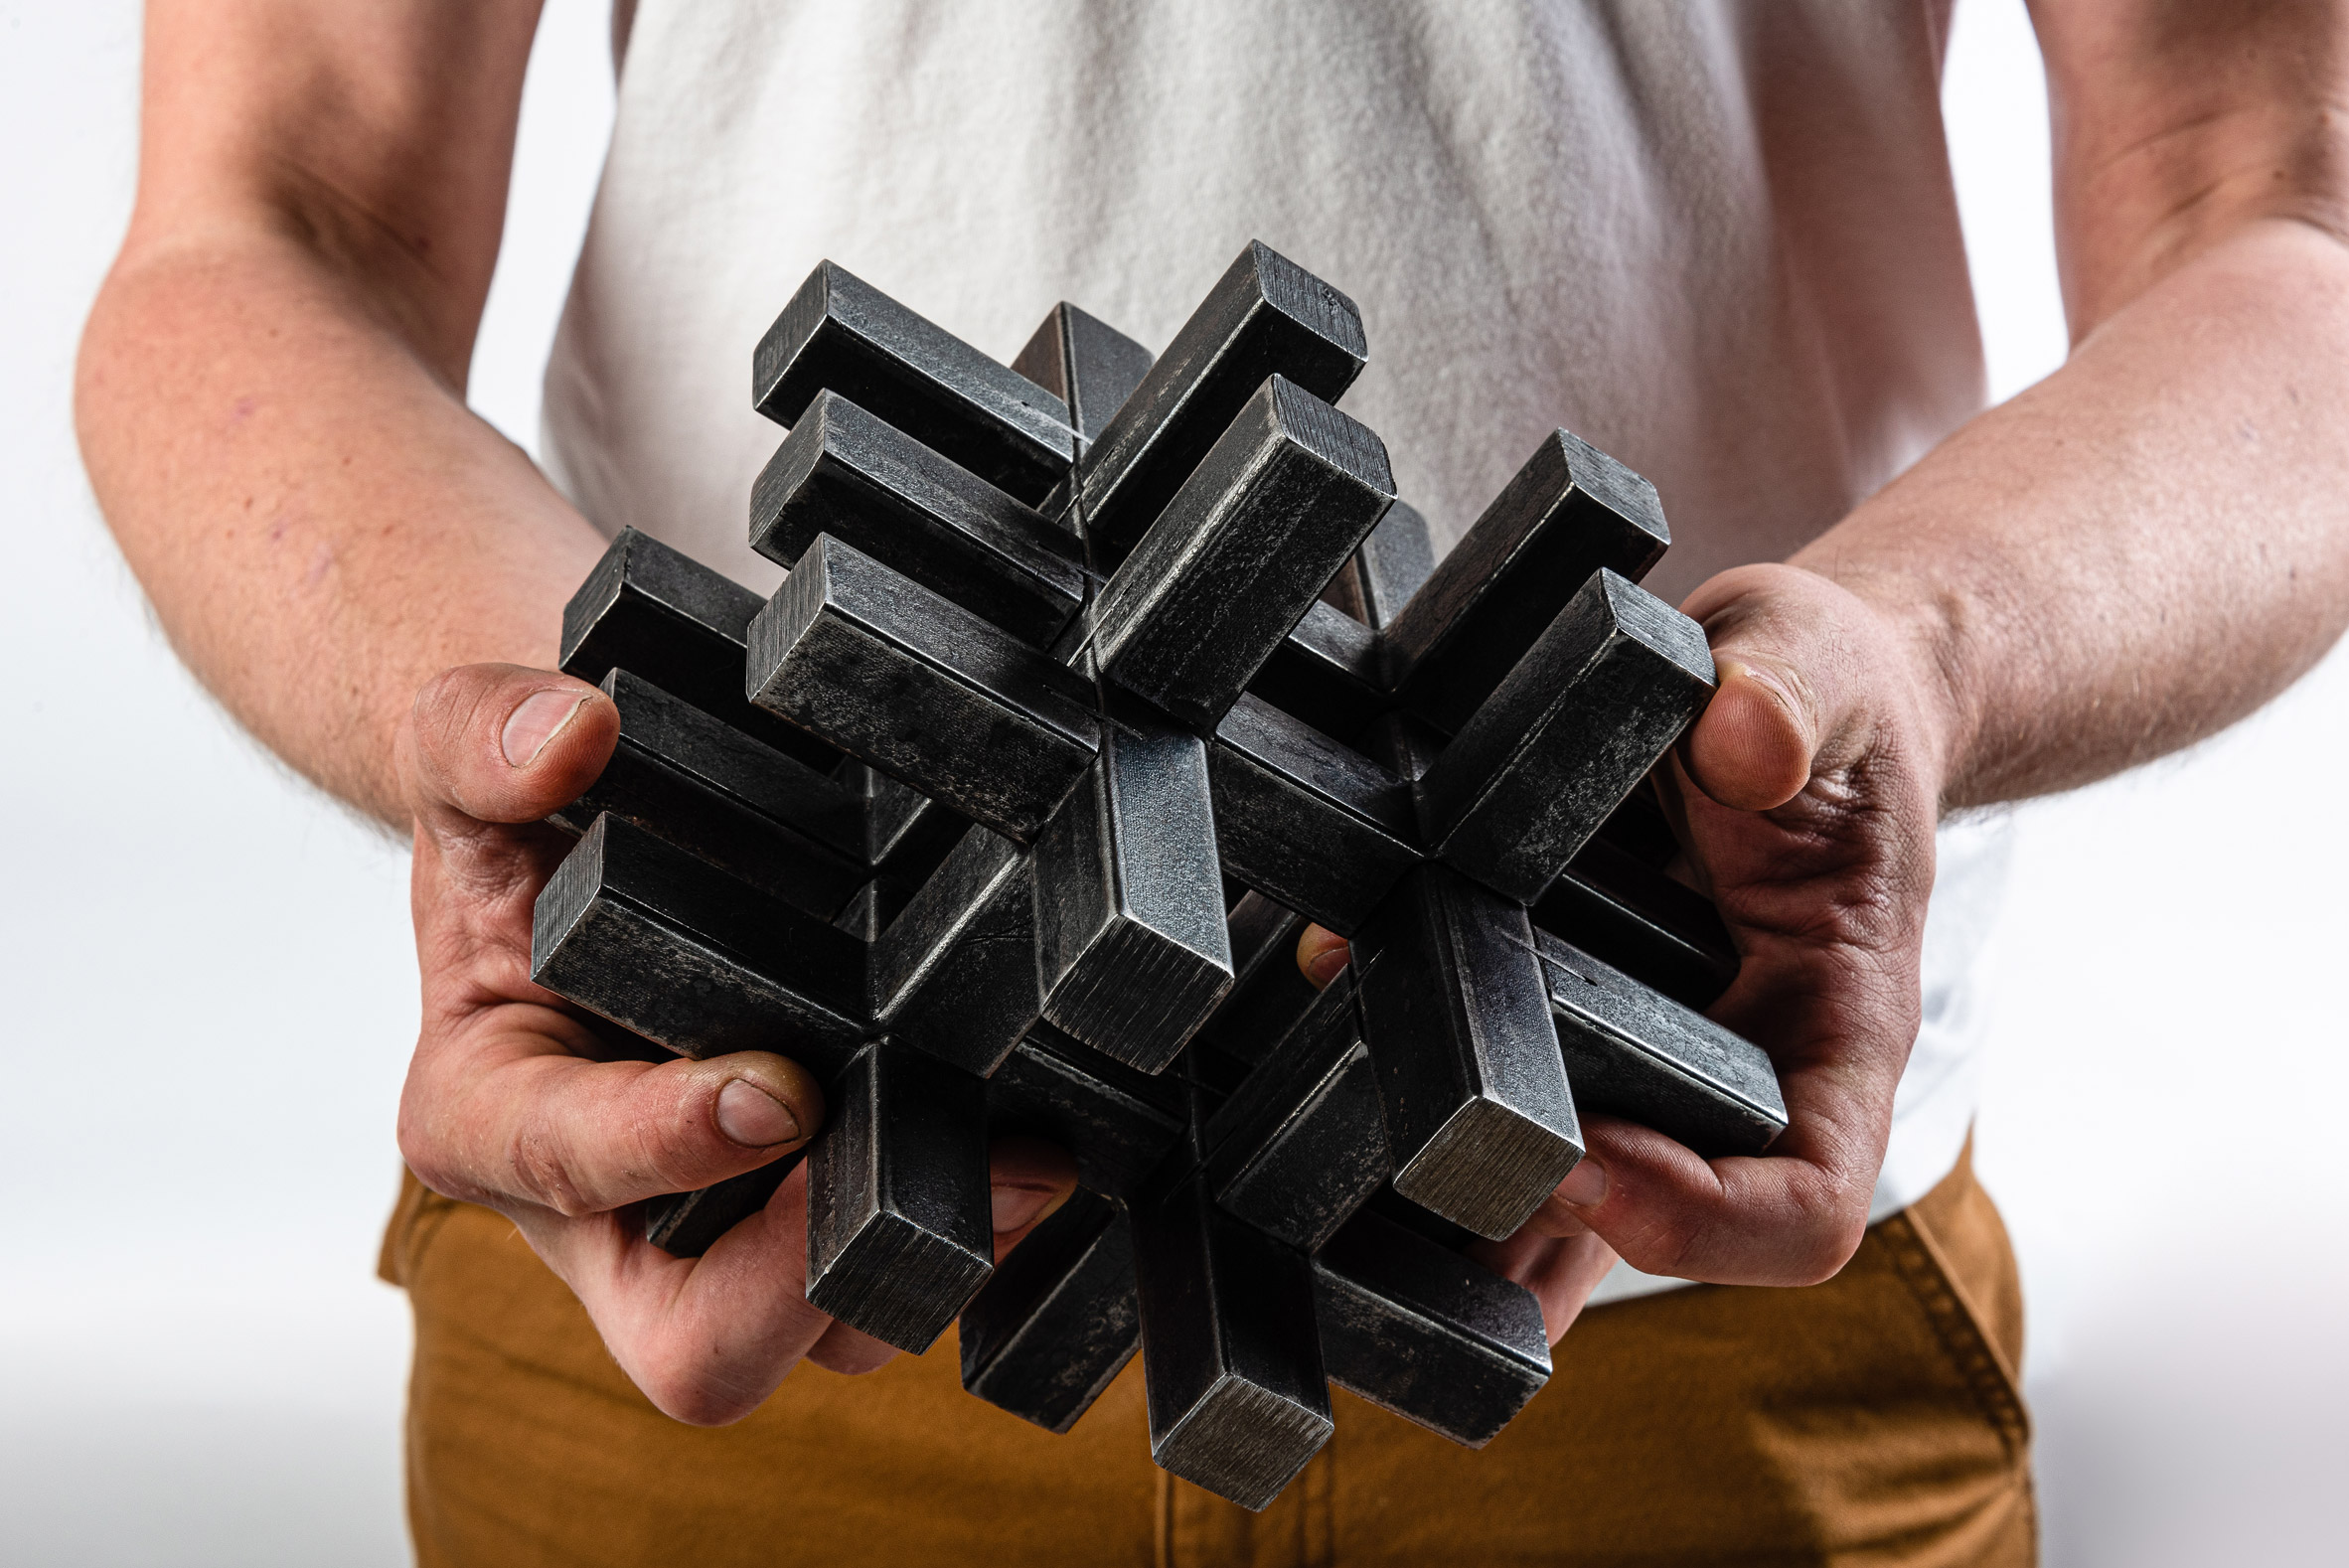 Person holding a black sculpture made up of interlocking 3D crosses by a New Designers winner